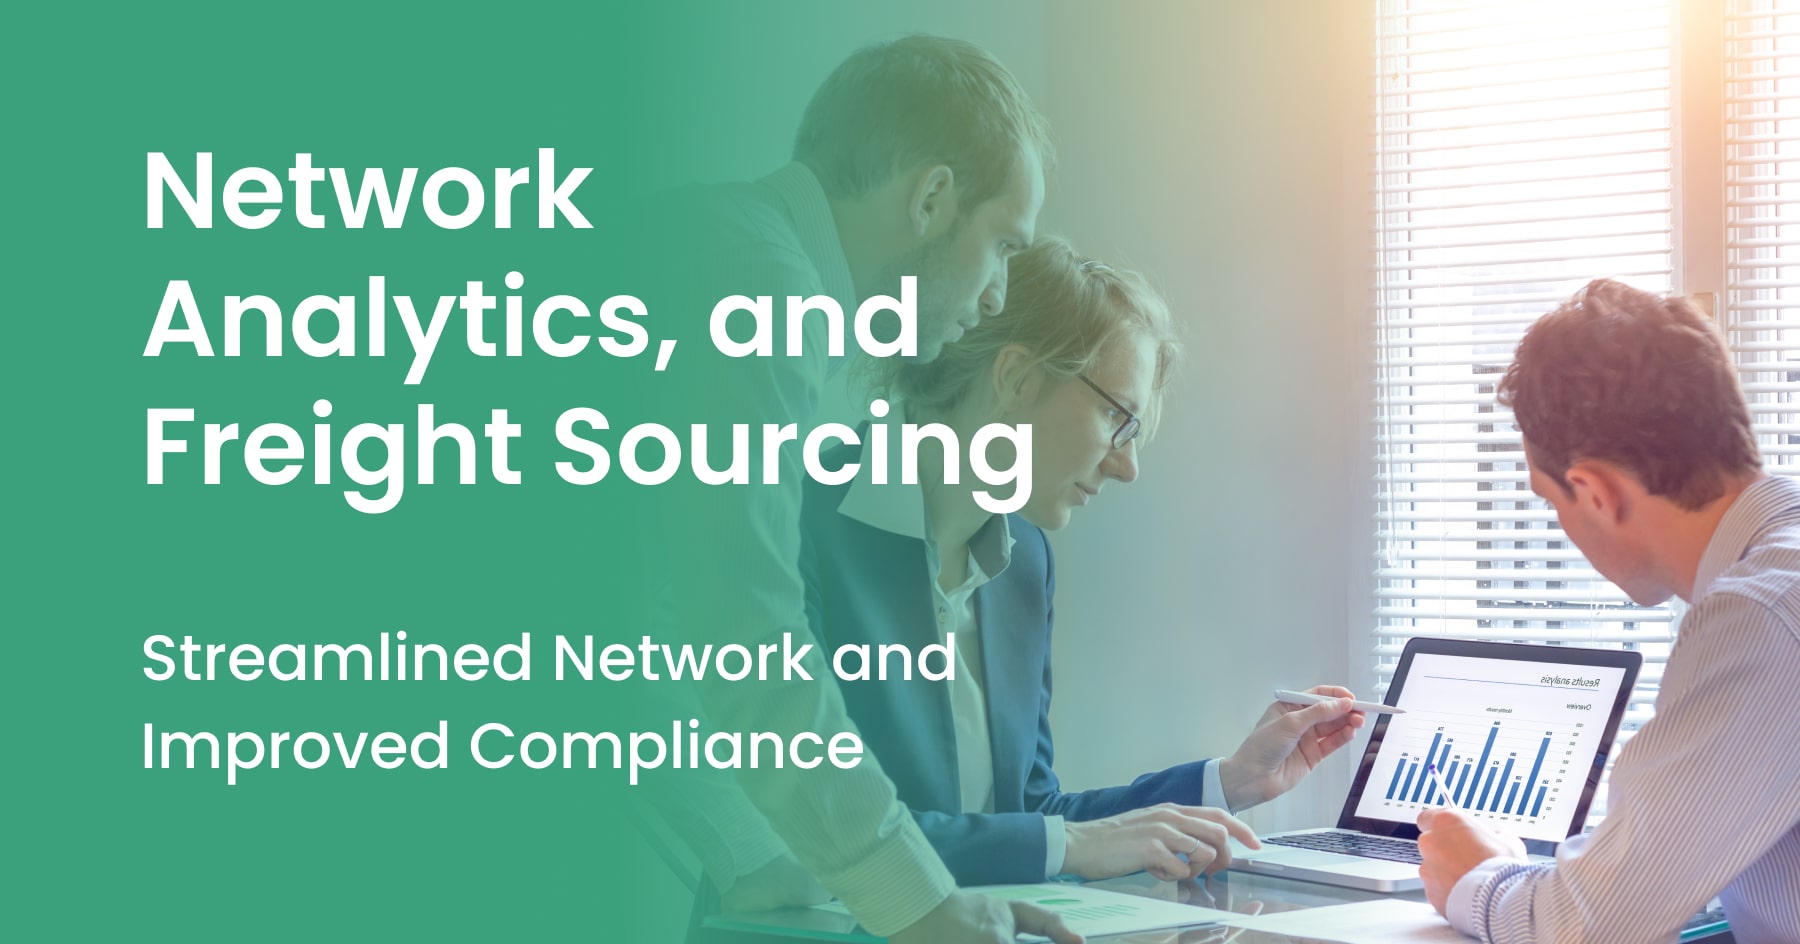 Procurement Case Study - Network Analytics and Freight Sourcing-Streamlined Network and Improved Compliance